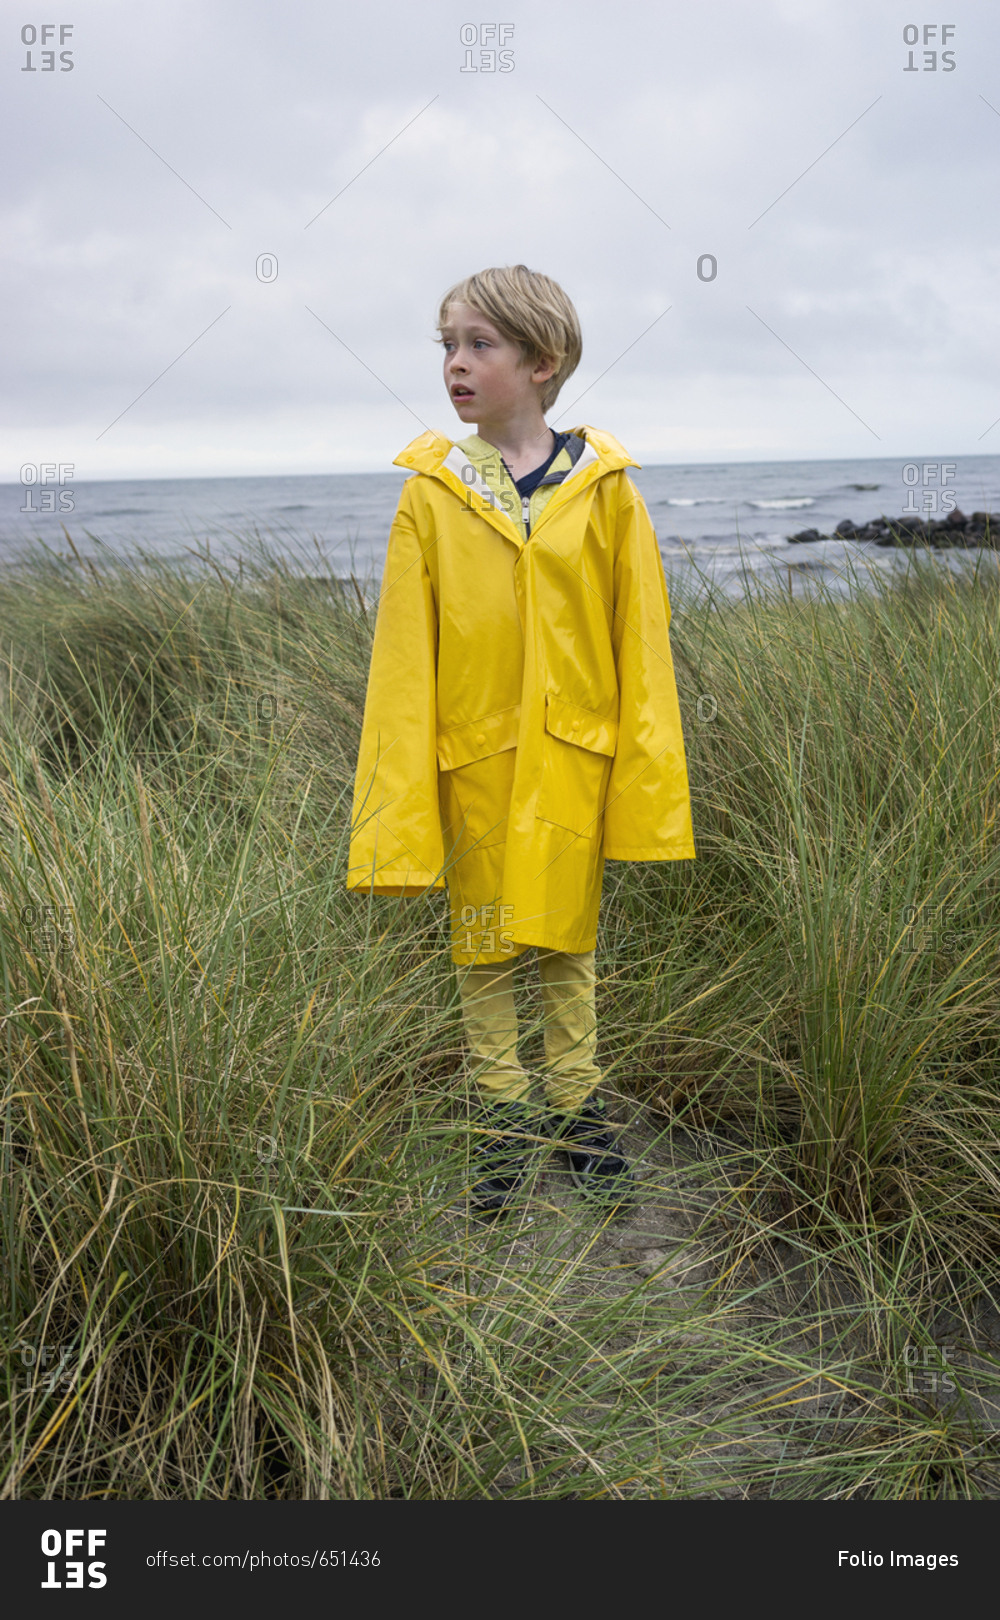 A young boy in the tussock grass at the beach in wet weather gear